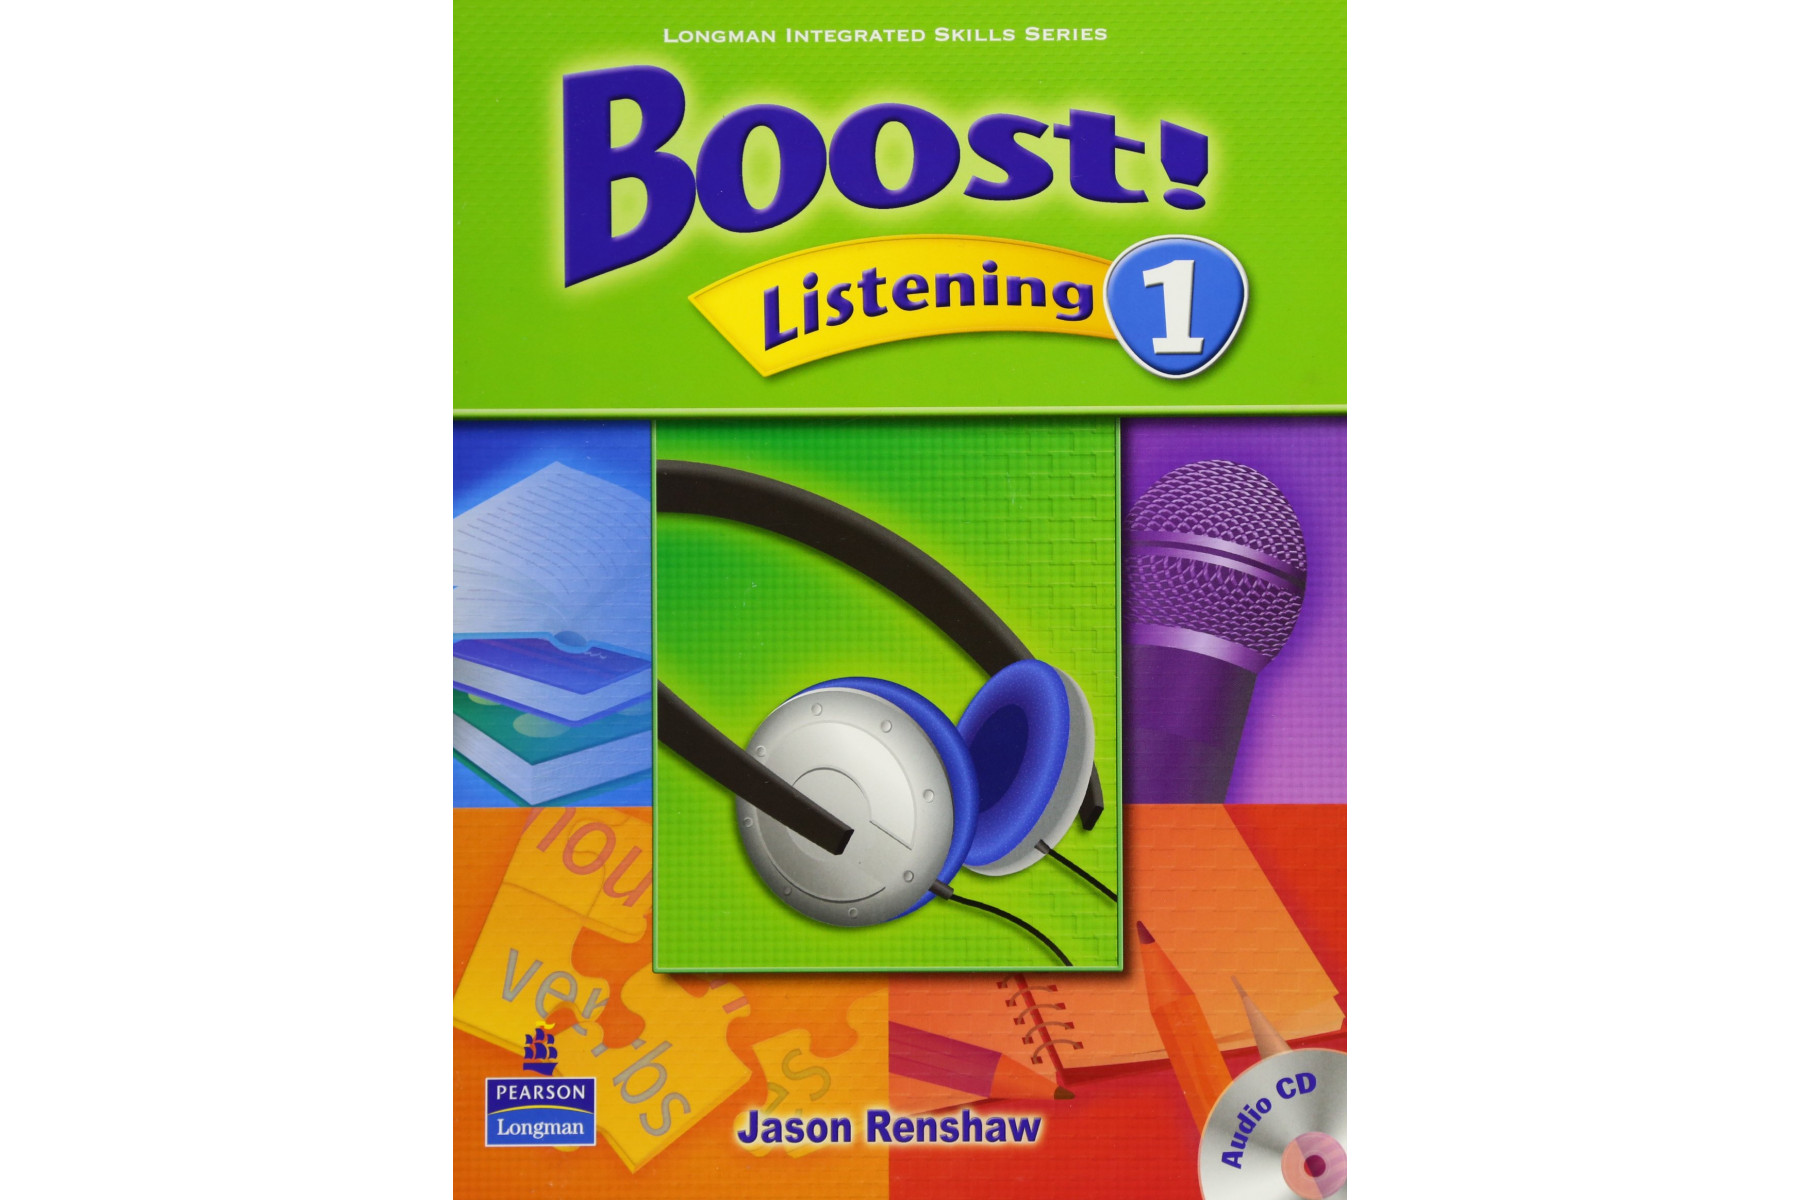 Boost! Listening 1 Student Book with Audio CD